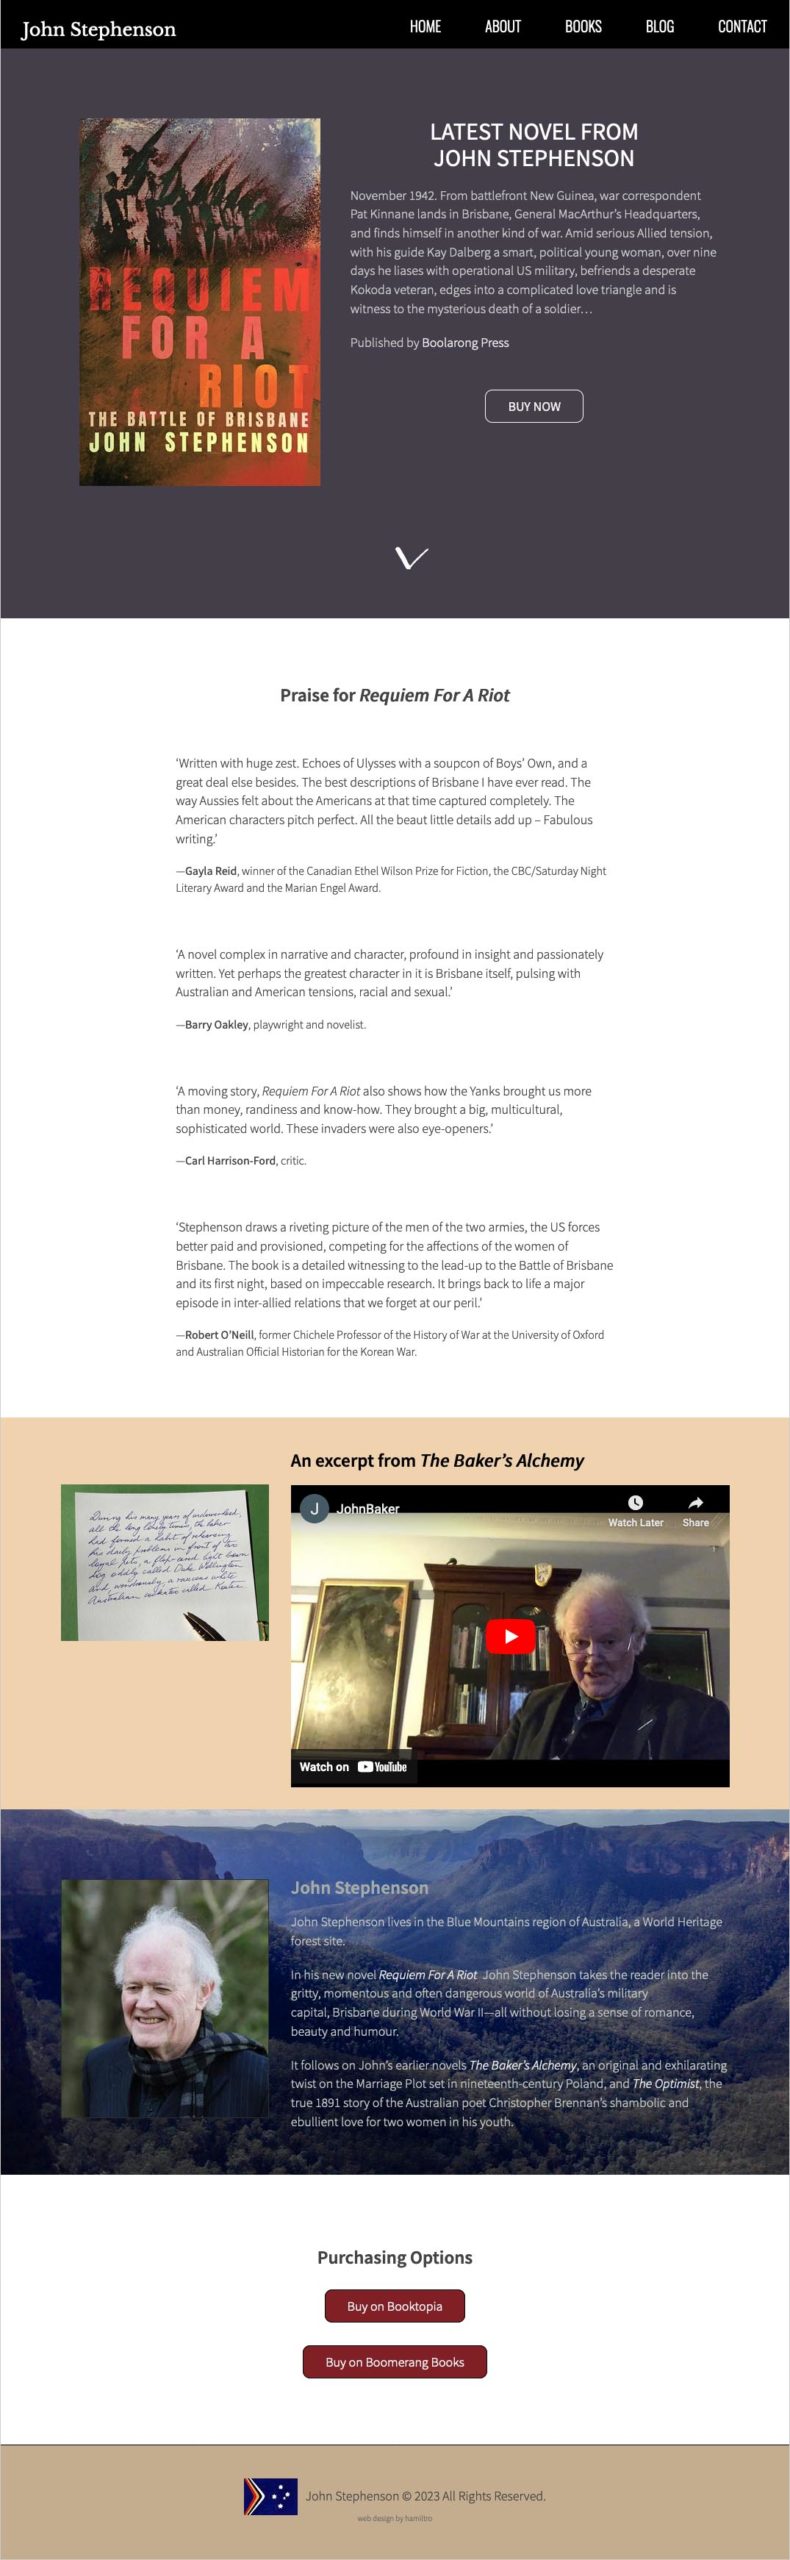 Website design for an author in Australia. The long-scrolling homepage features an image of the cover of the author's latest book plus a description and buy-now button in the hero section, a section of quotes from reviews for the book, a video of the author reading from the novel, a portrait and biographical description and buttons to purchase the latest book.